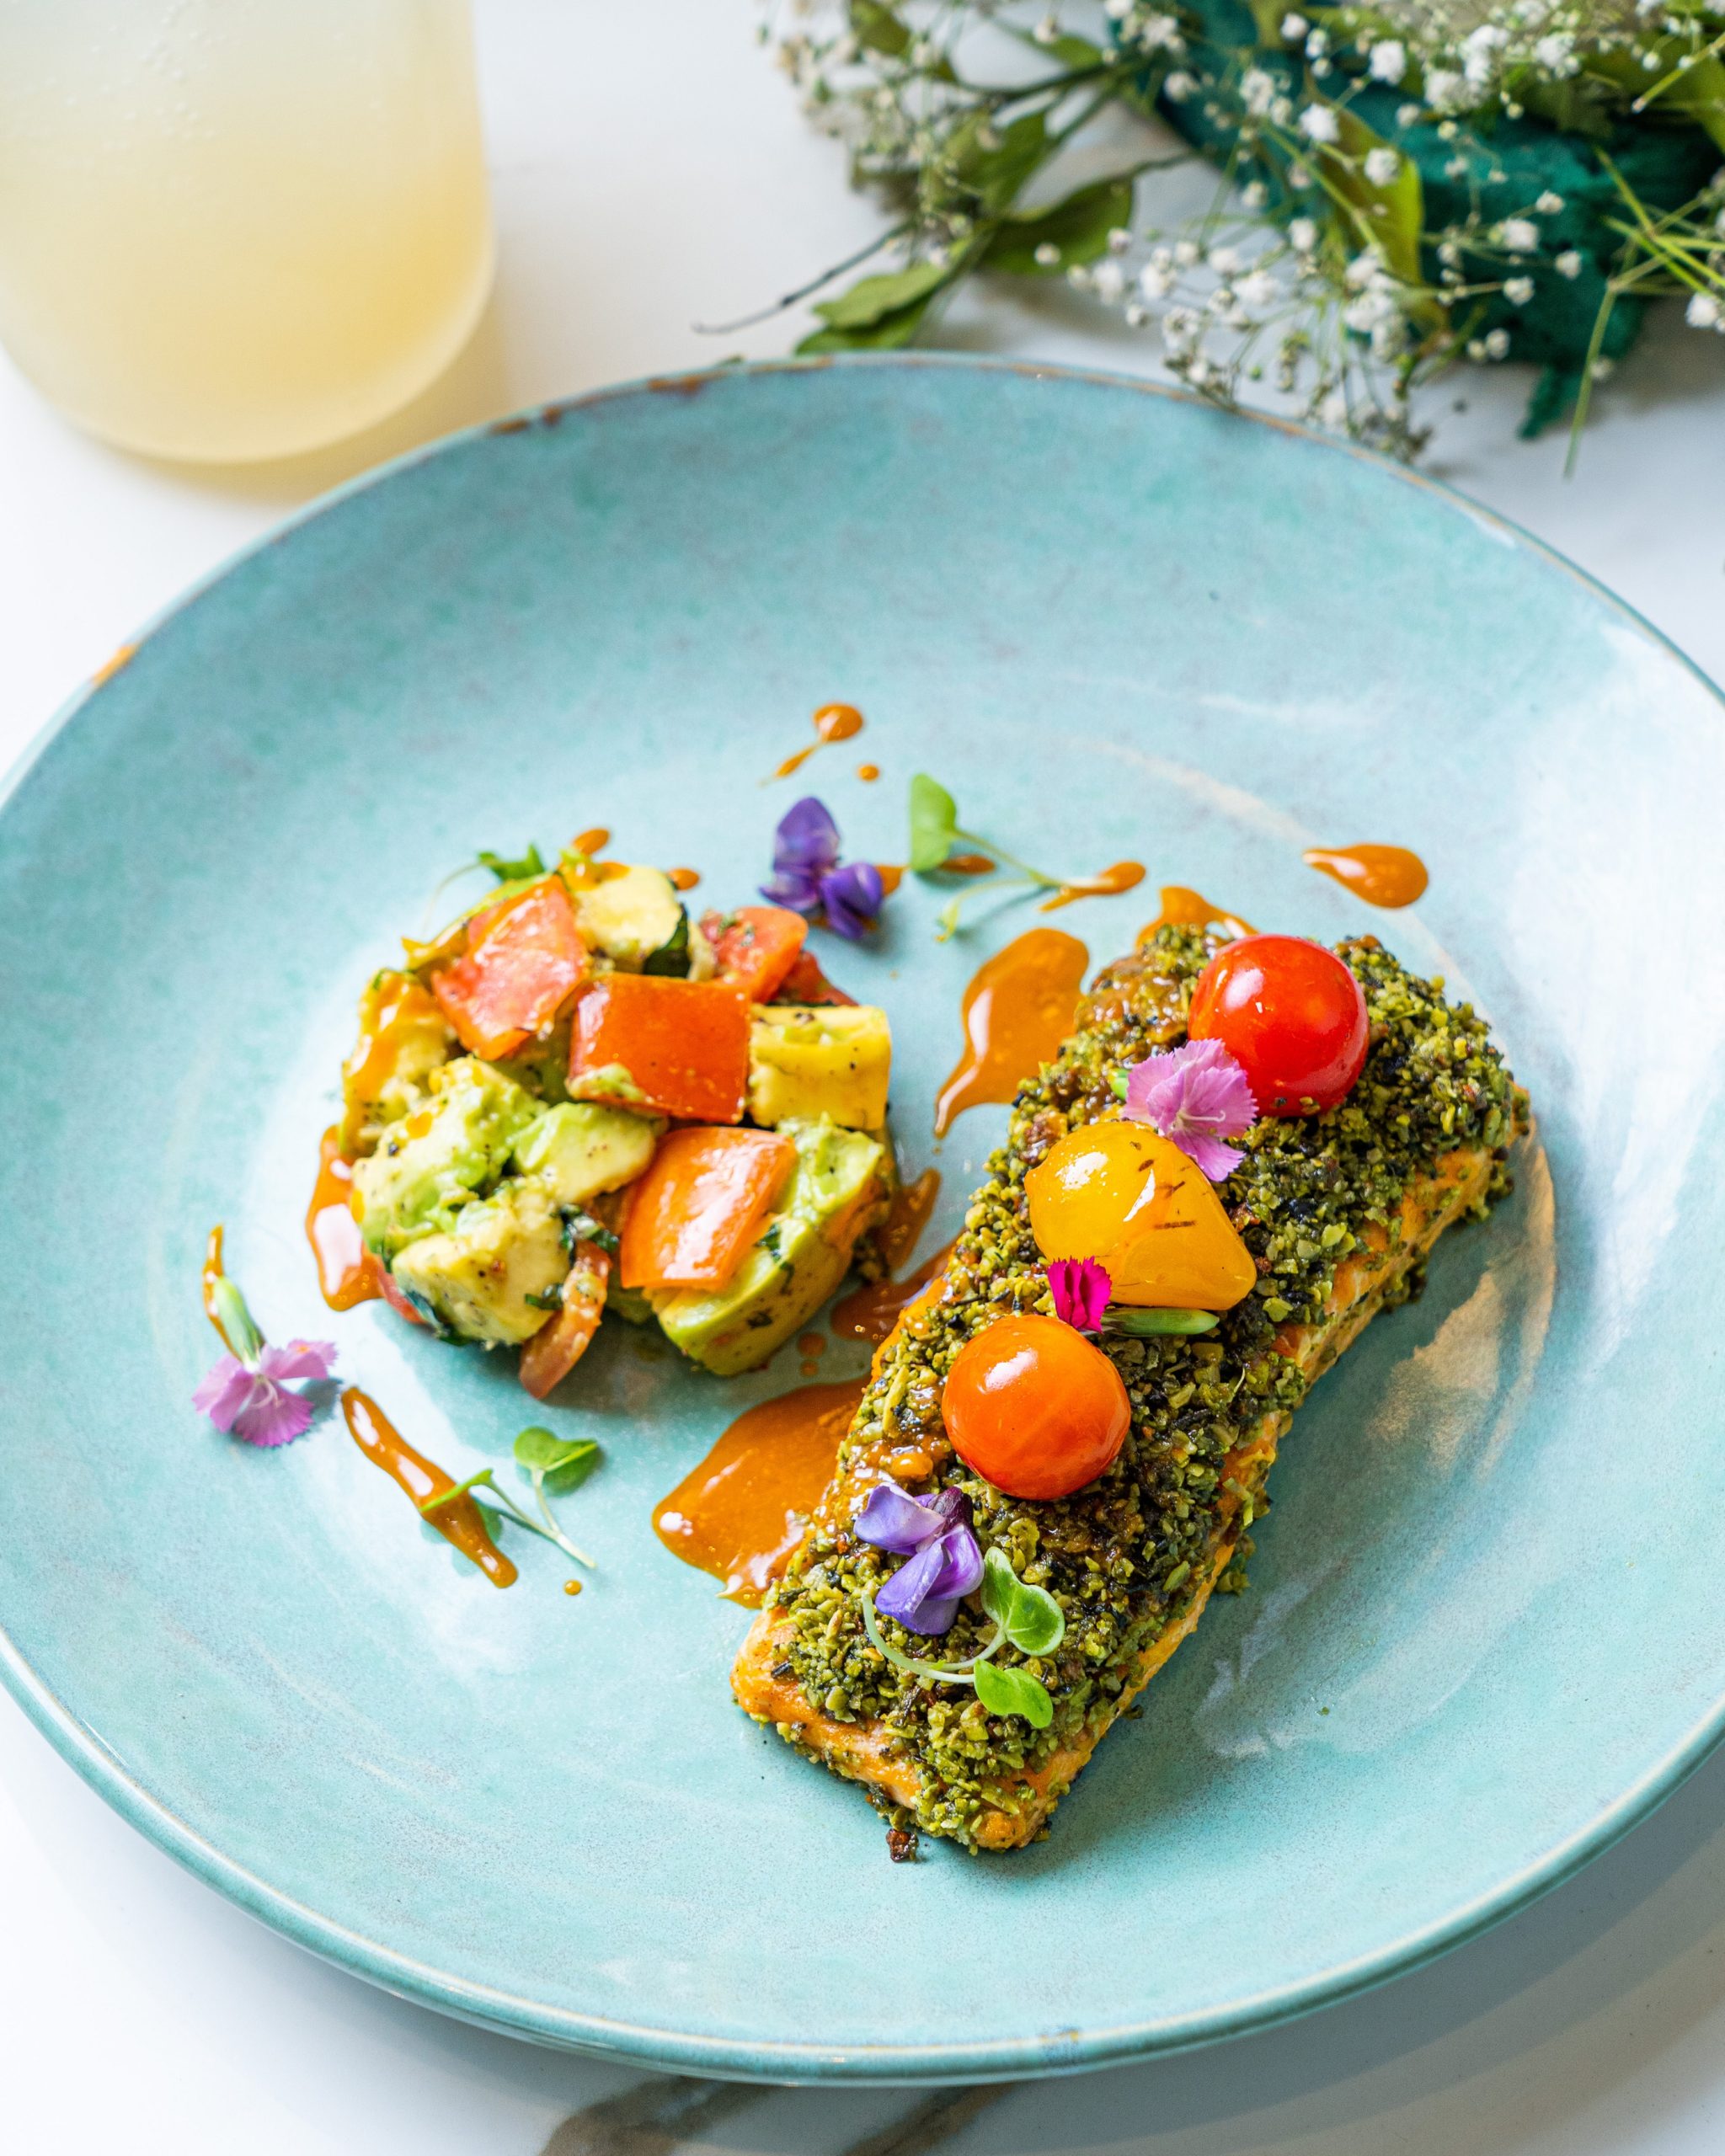 Bloom Cafe in Bandra, Mumbai Leads the Way with Delicious and Healthy Options